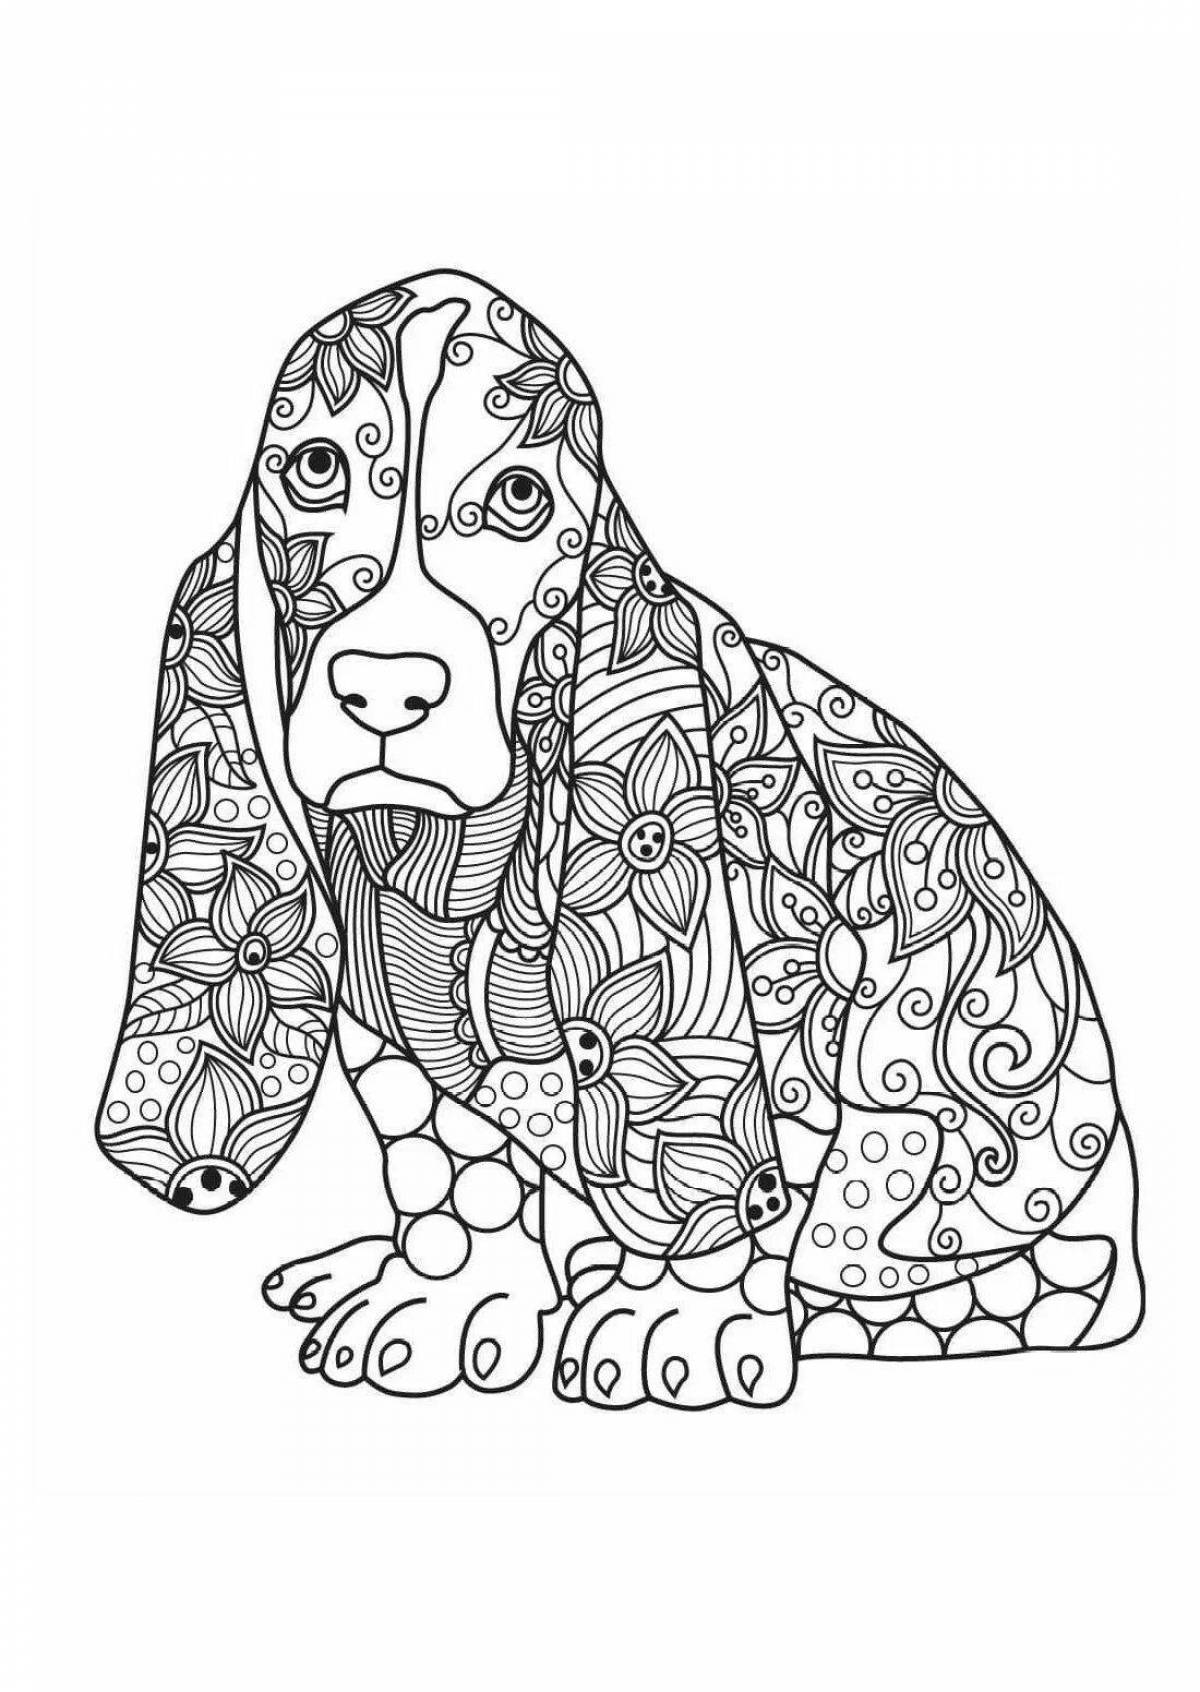 Coloring pages of dogs for adults